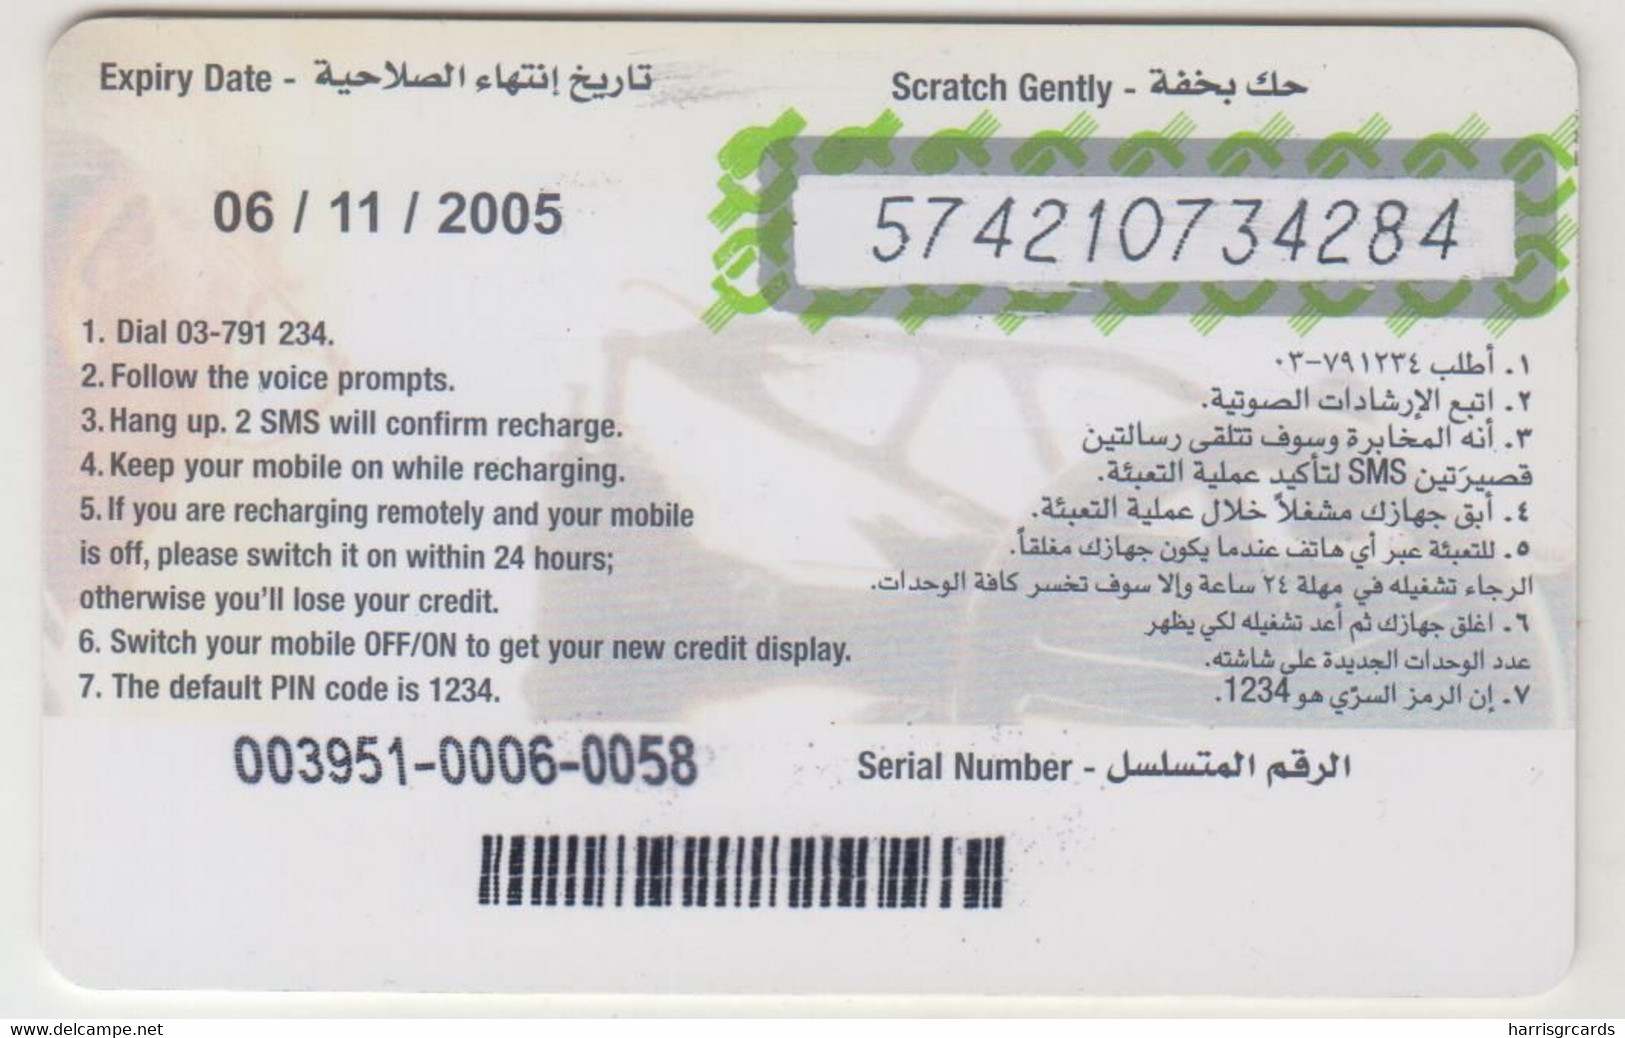 LEBANON - Premiere - Sewing, Libancell Recharge Card 180 Units, Exp.date 27/01/06, Used - Liban